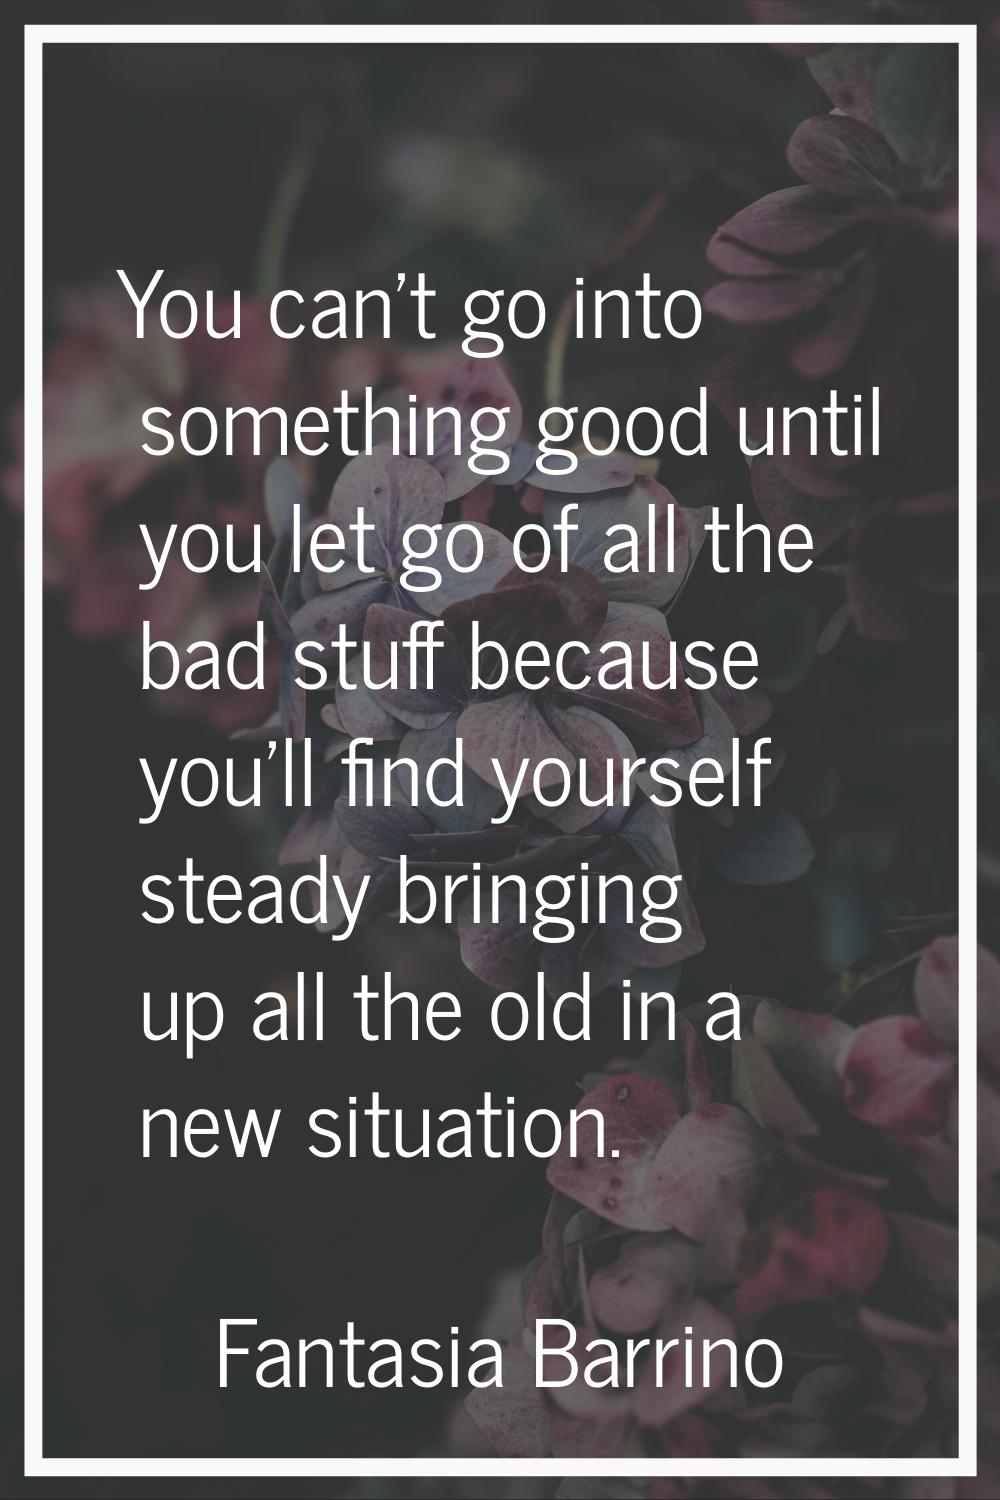 You can't go into something good until you let go of all the bad stuff because you'll find yourself